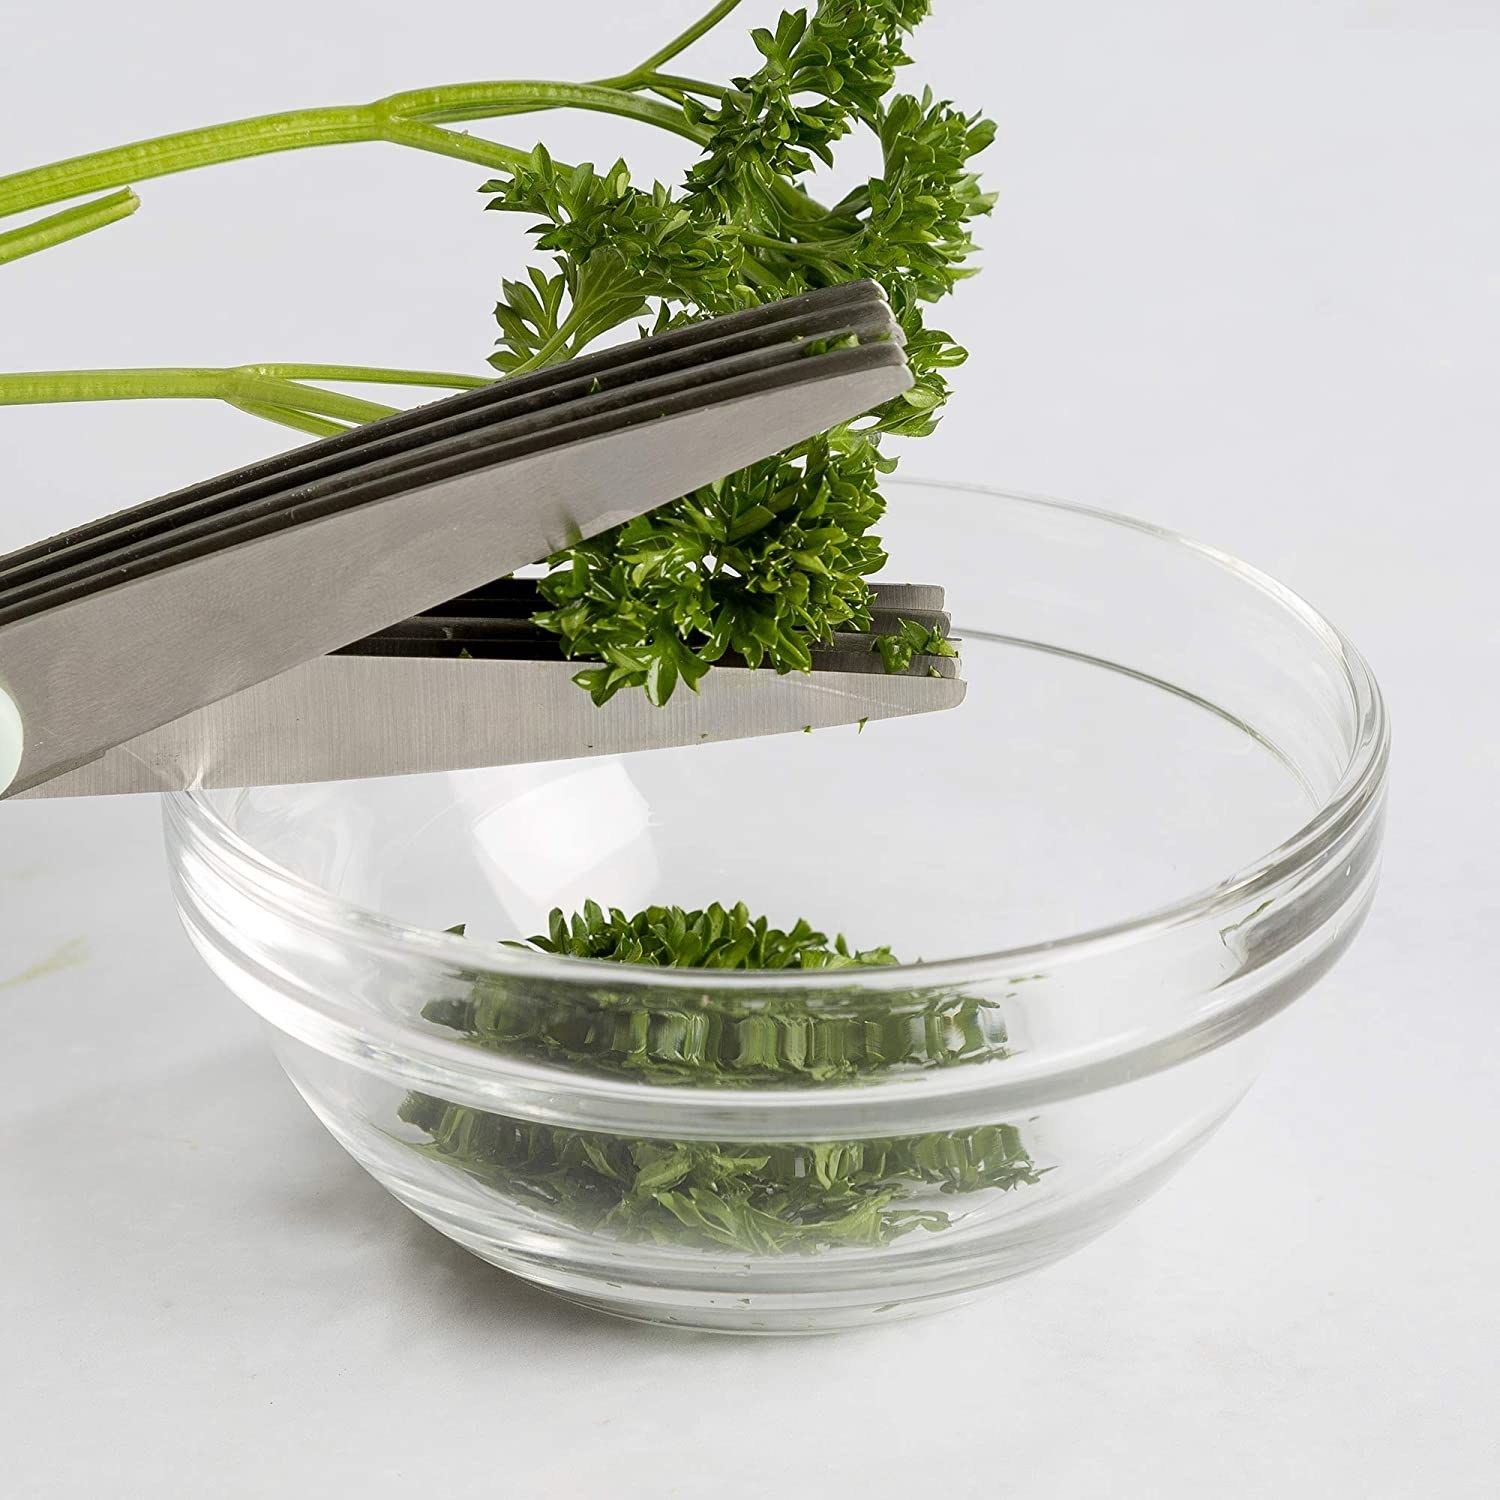 Hands using the scissors to cut herbs into a bowl